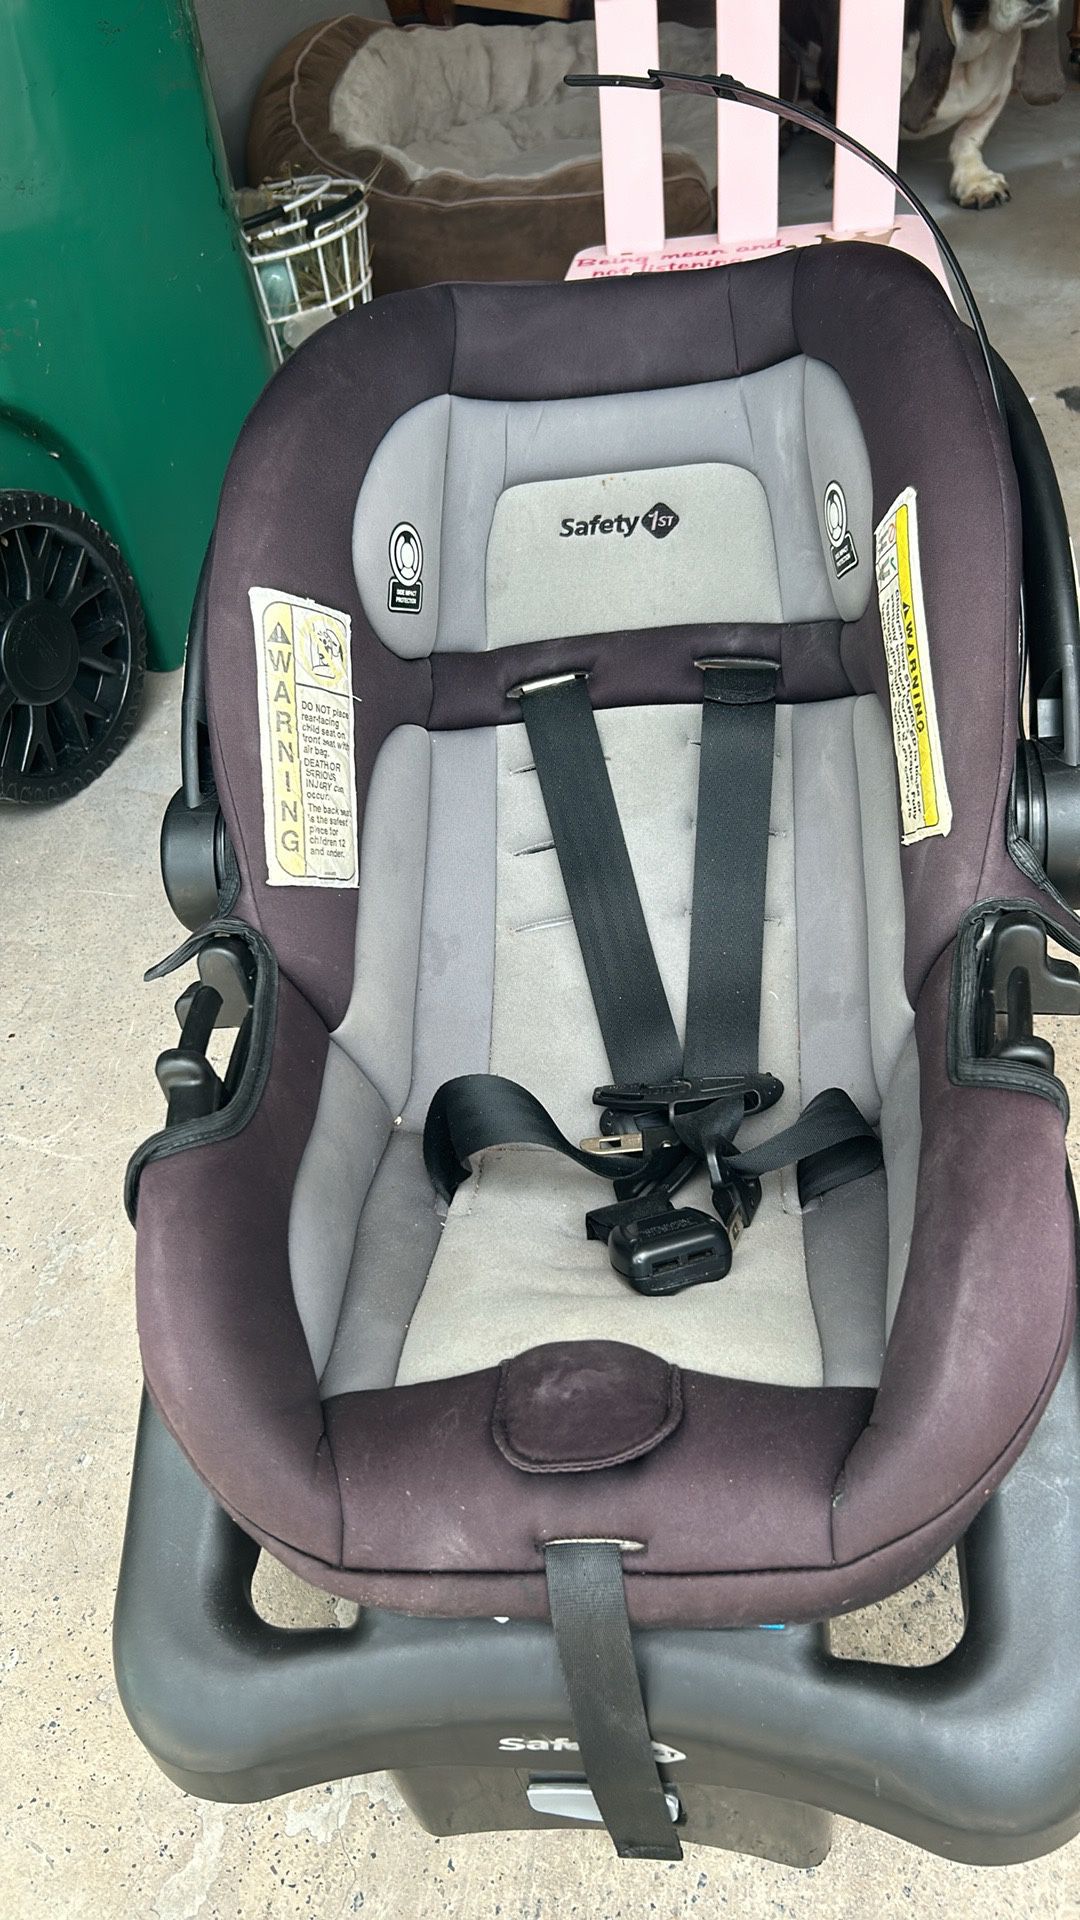 Booster Seats And Car Seats, Baby Mattresses And Stroller